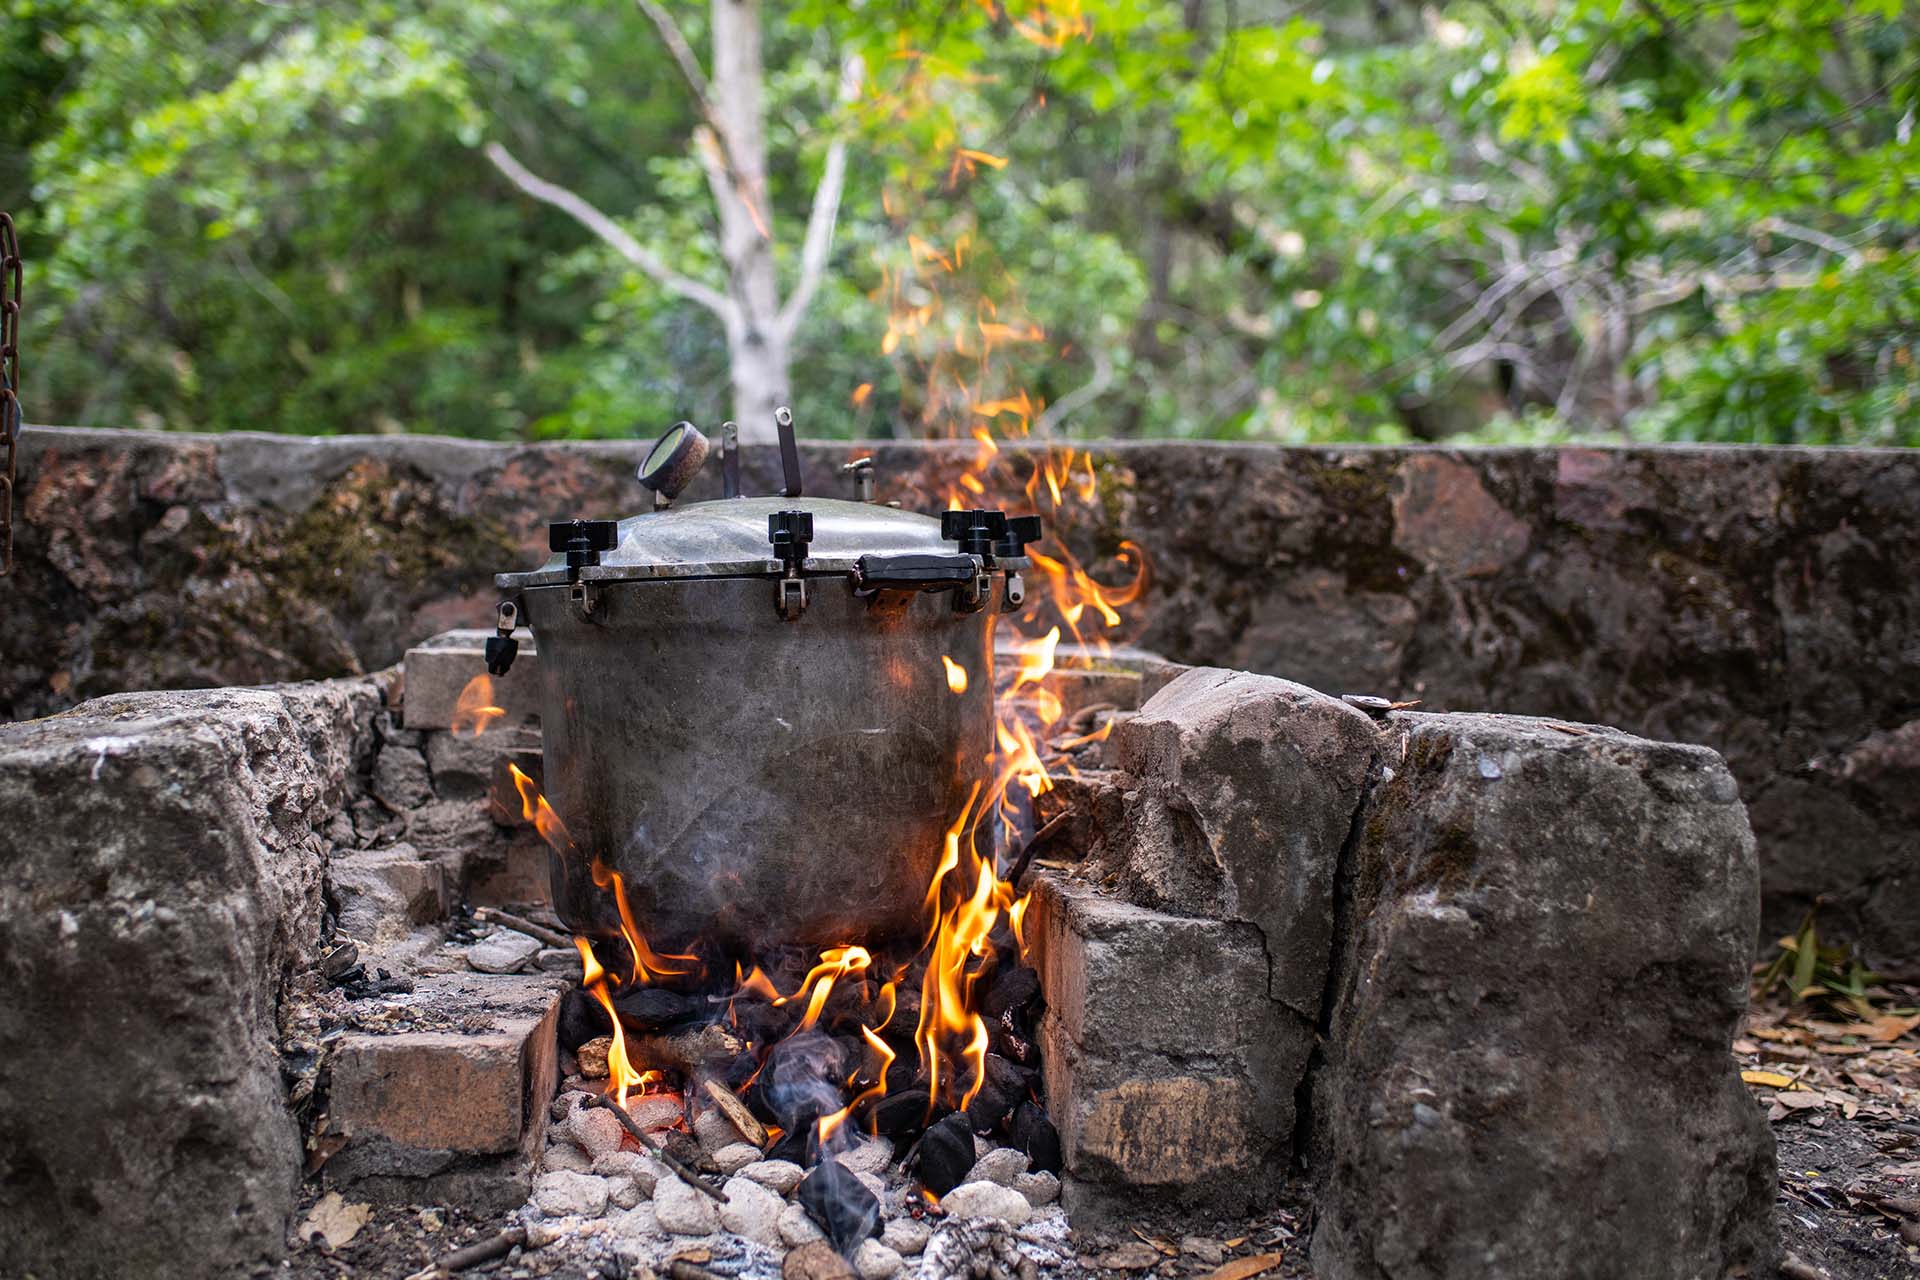 An old-fashioned pressure cooker heated over a fire outdoors.